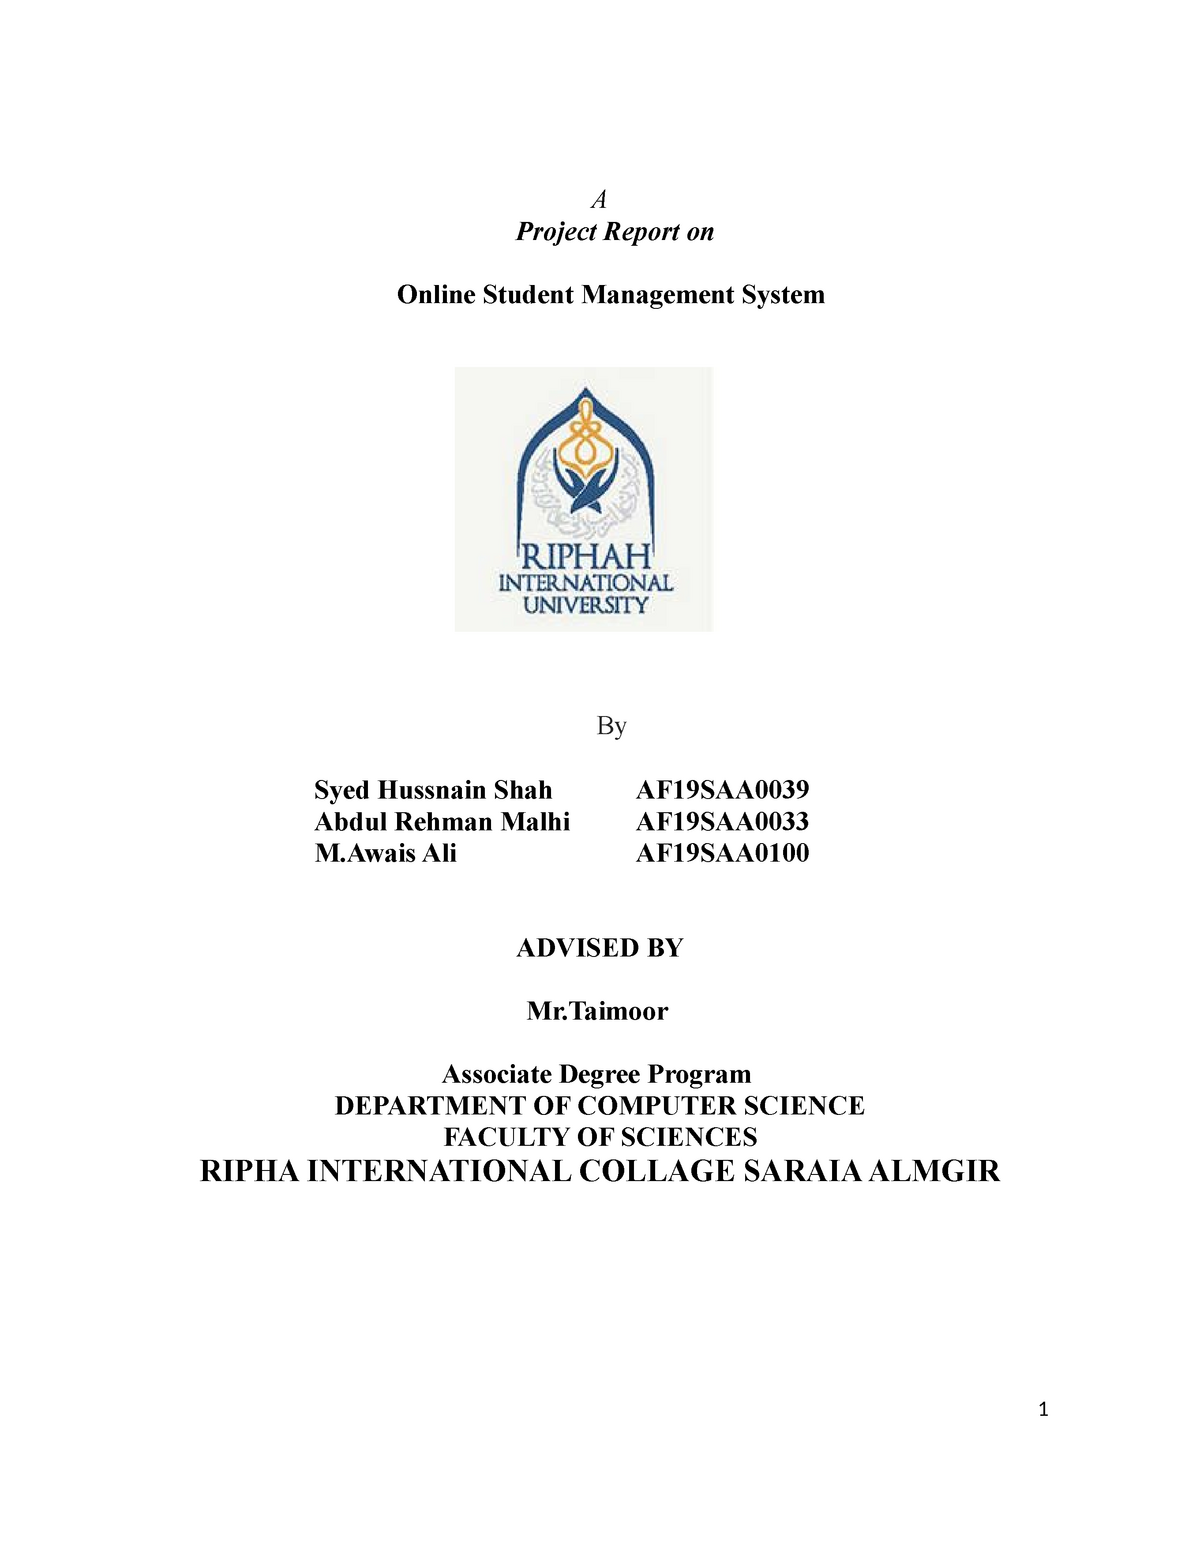 online education system project report abstract